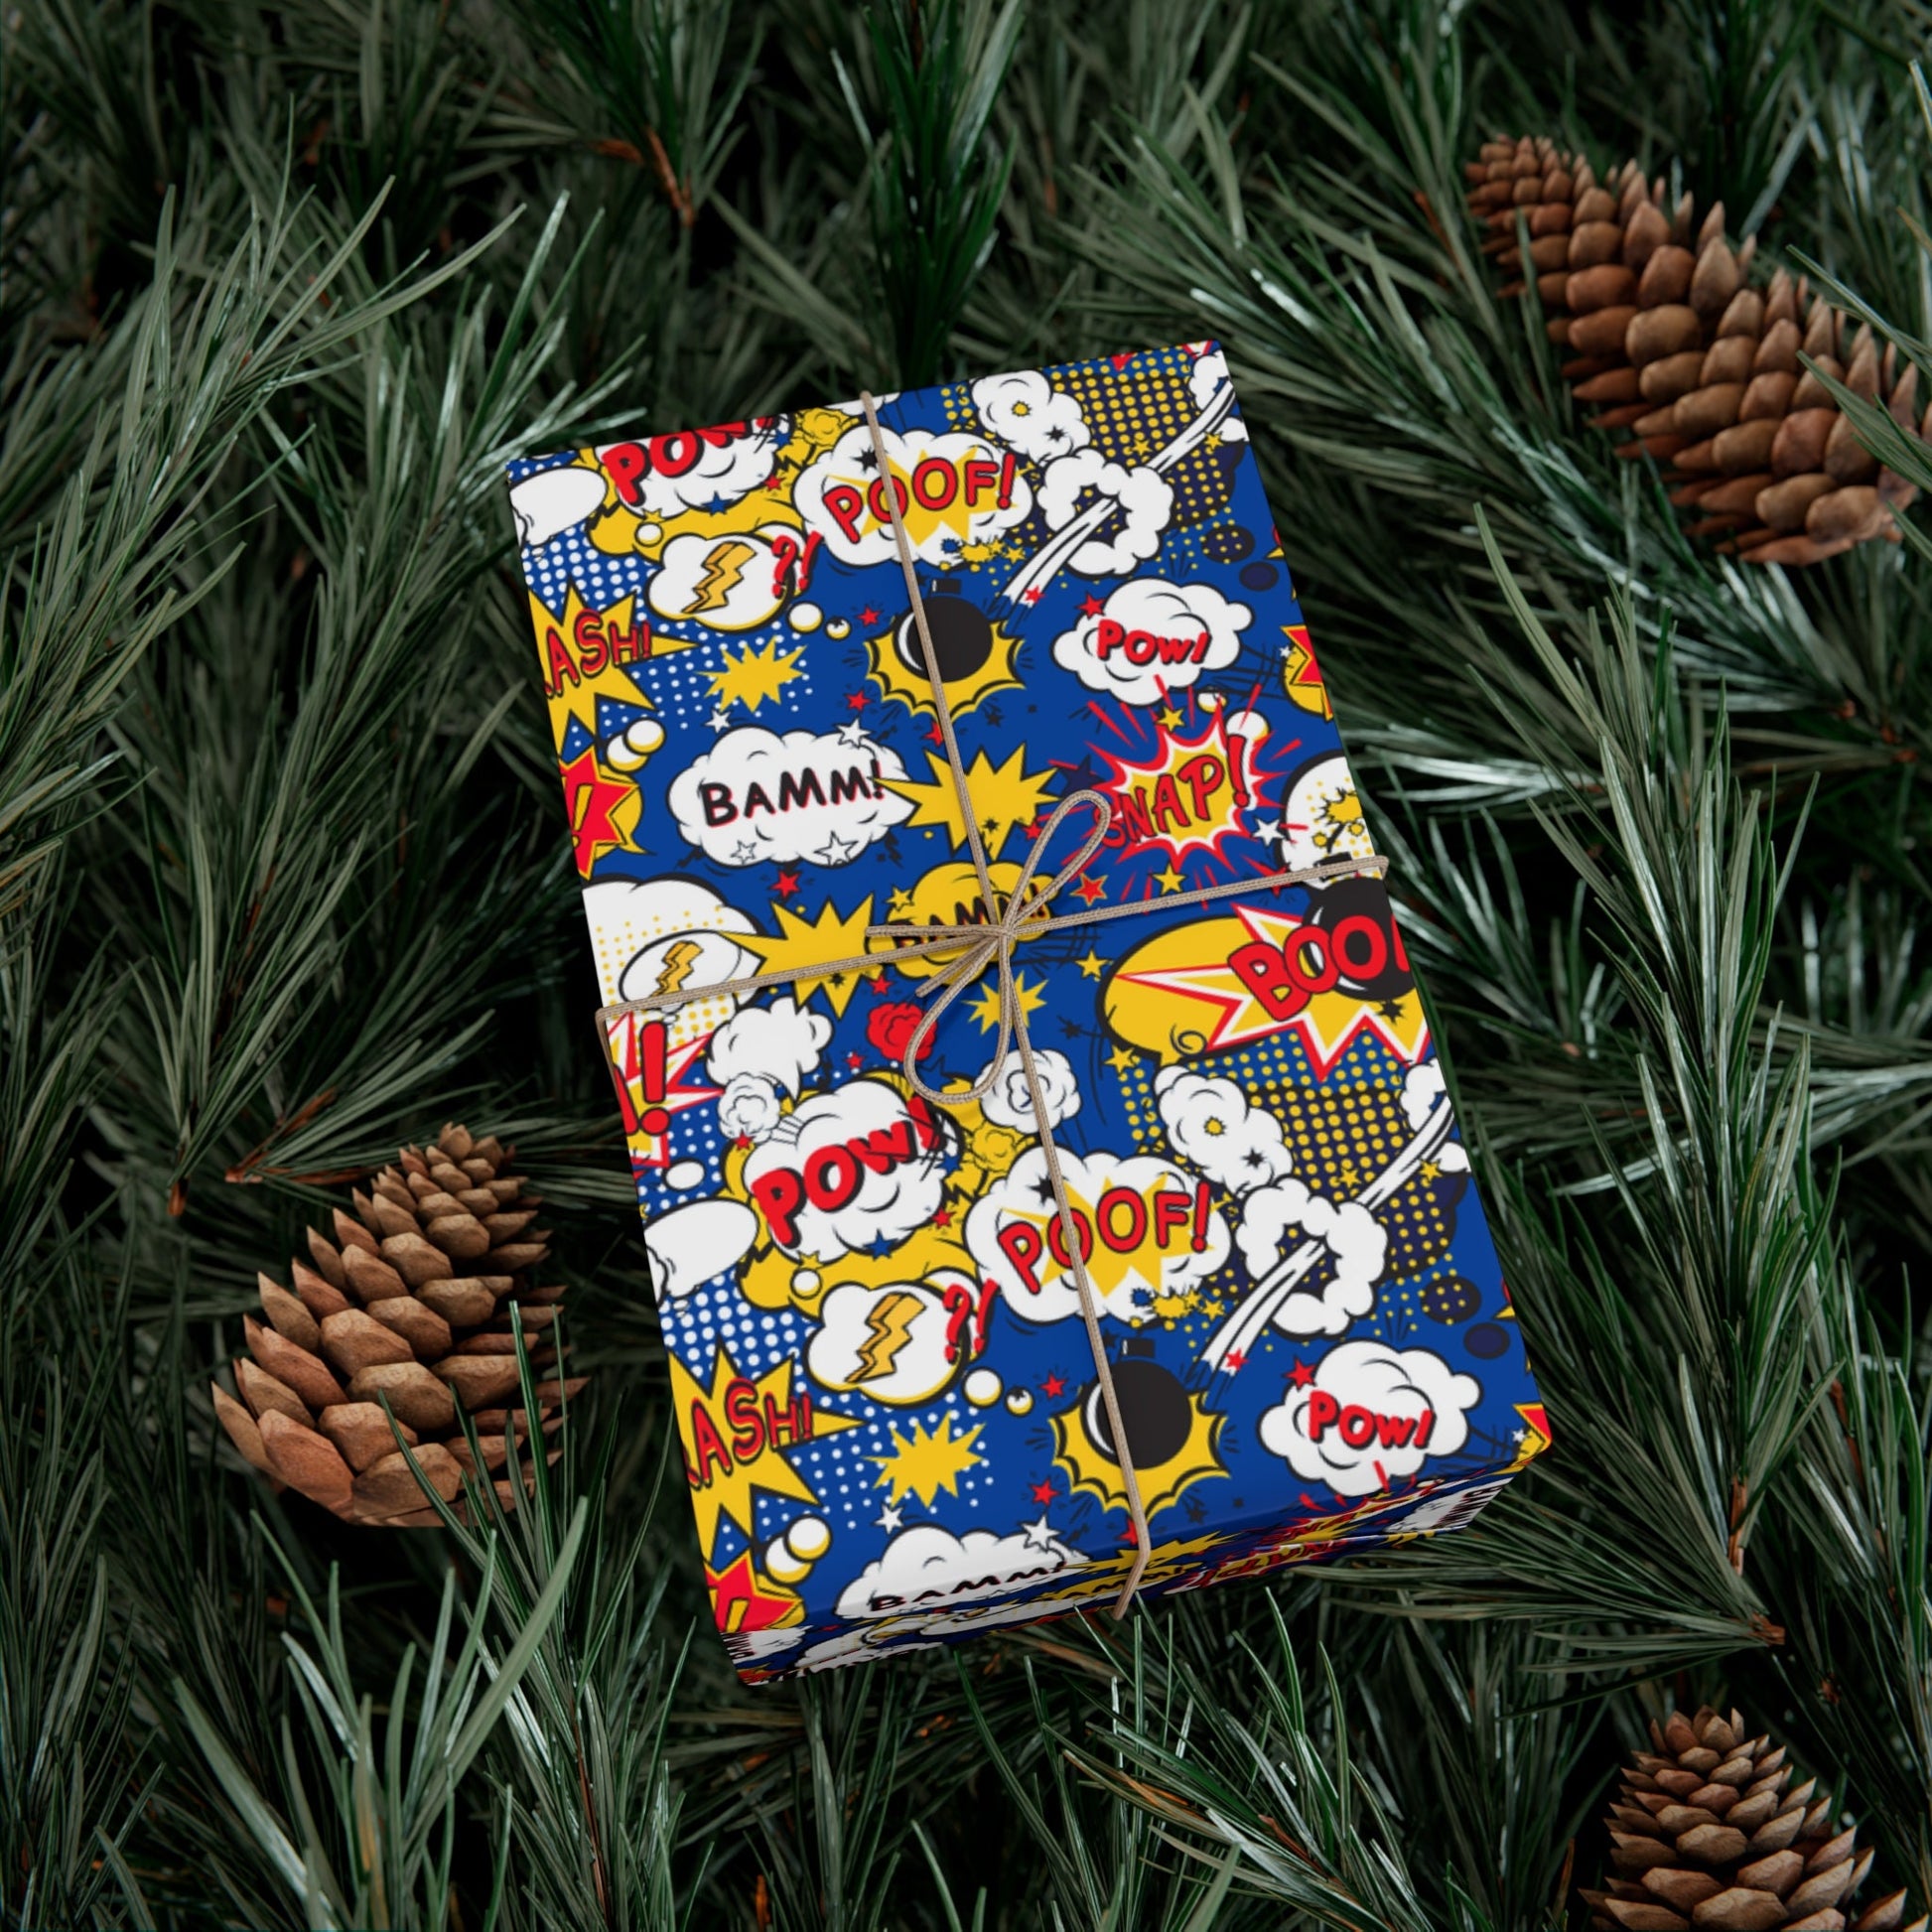 Blue Superhero Wrapping Paper, Fun Cartoon Comic Game Birthday Gift Wrap Paper, Present Paper Roll for Kids